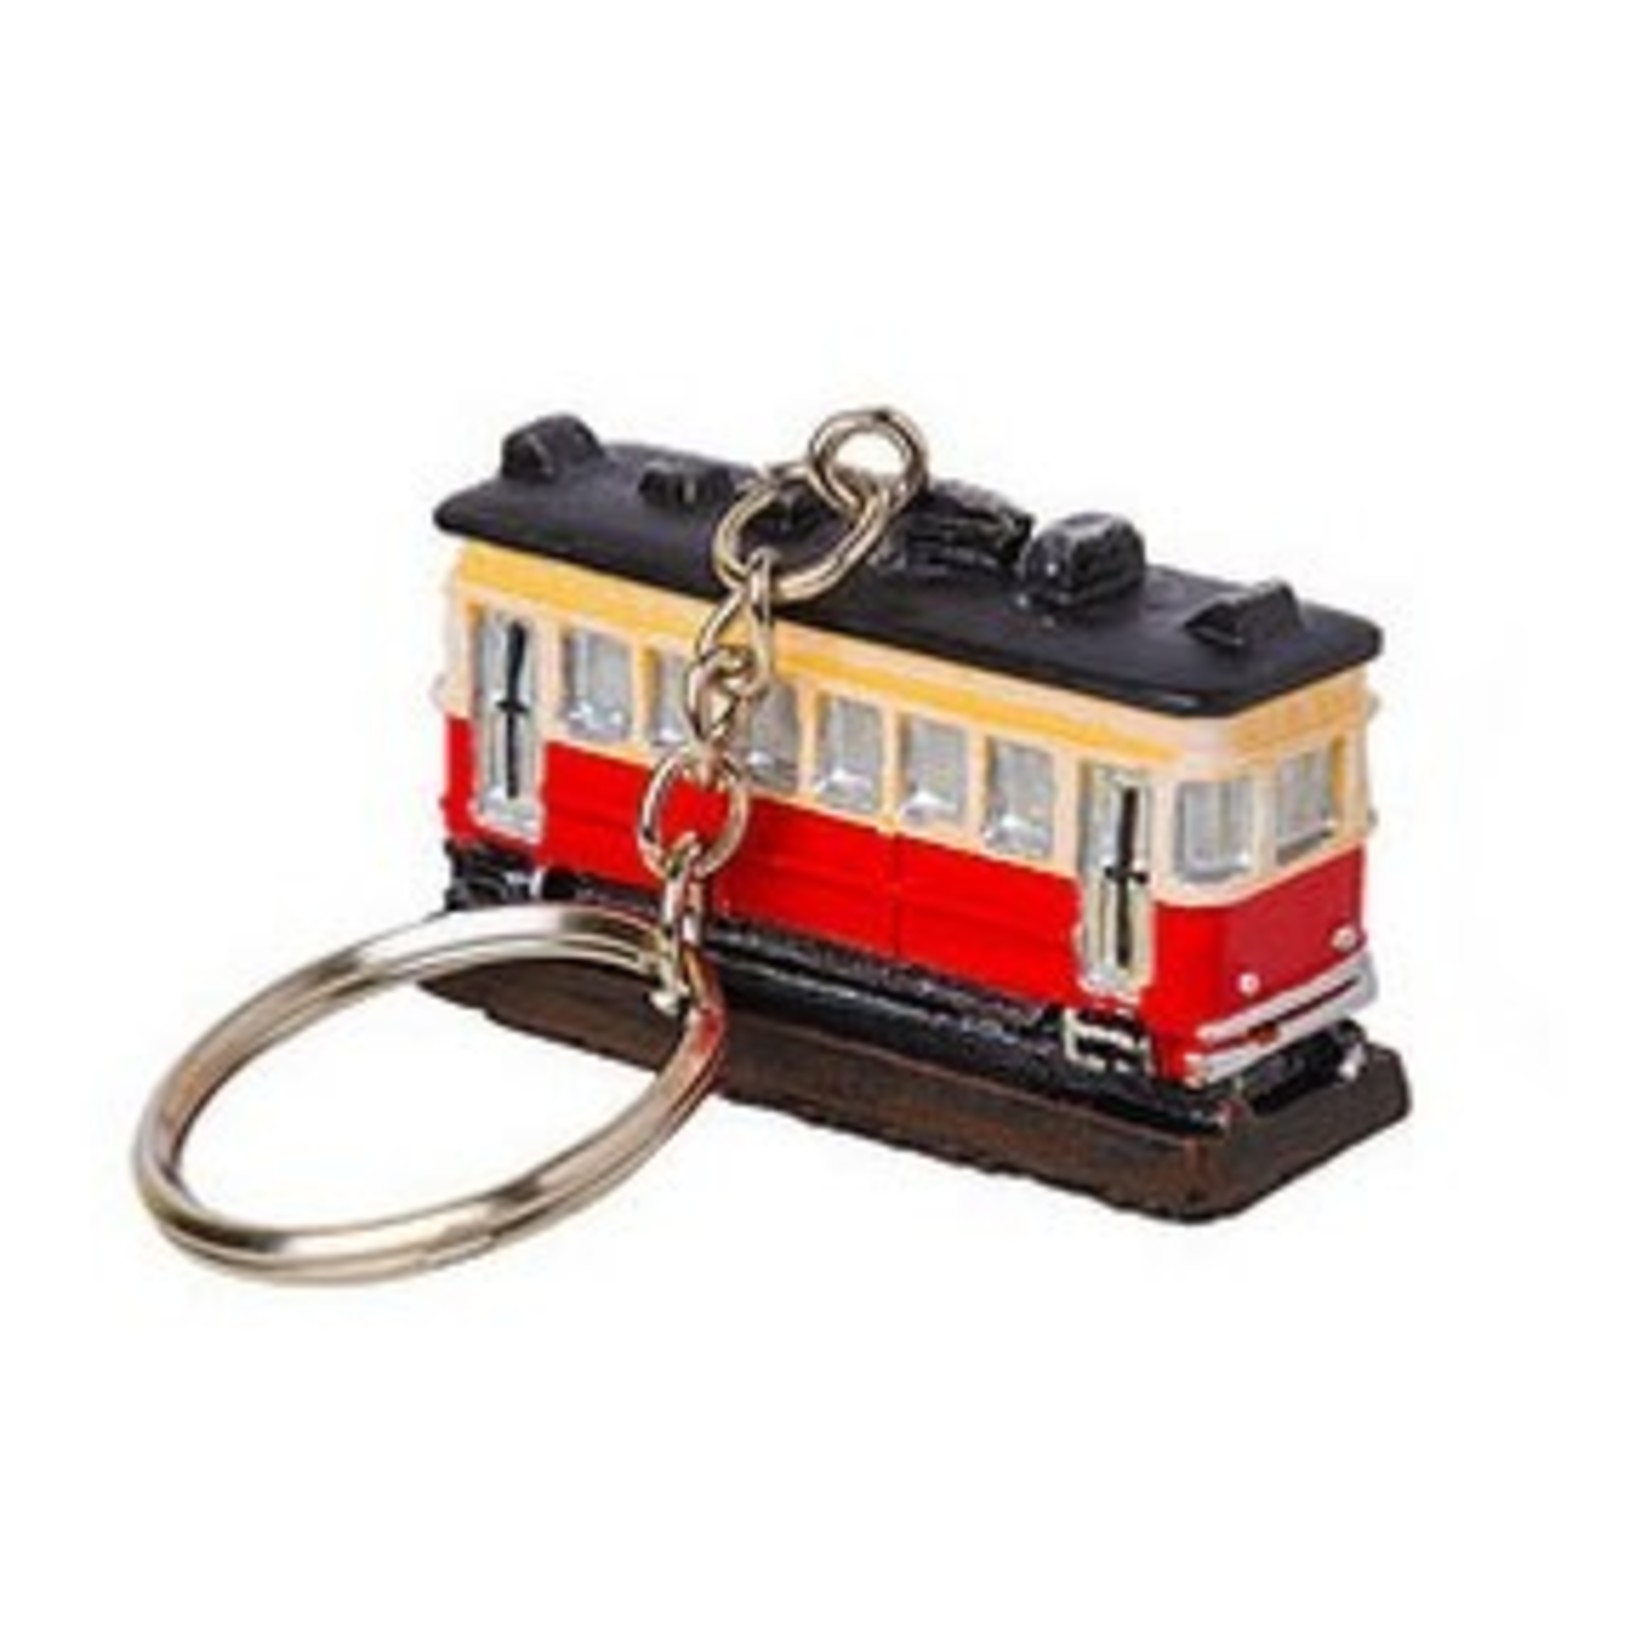 3T Rail Products Resin Trolley Keychain